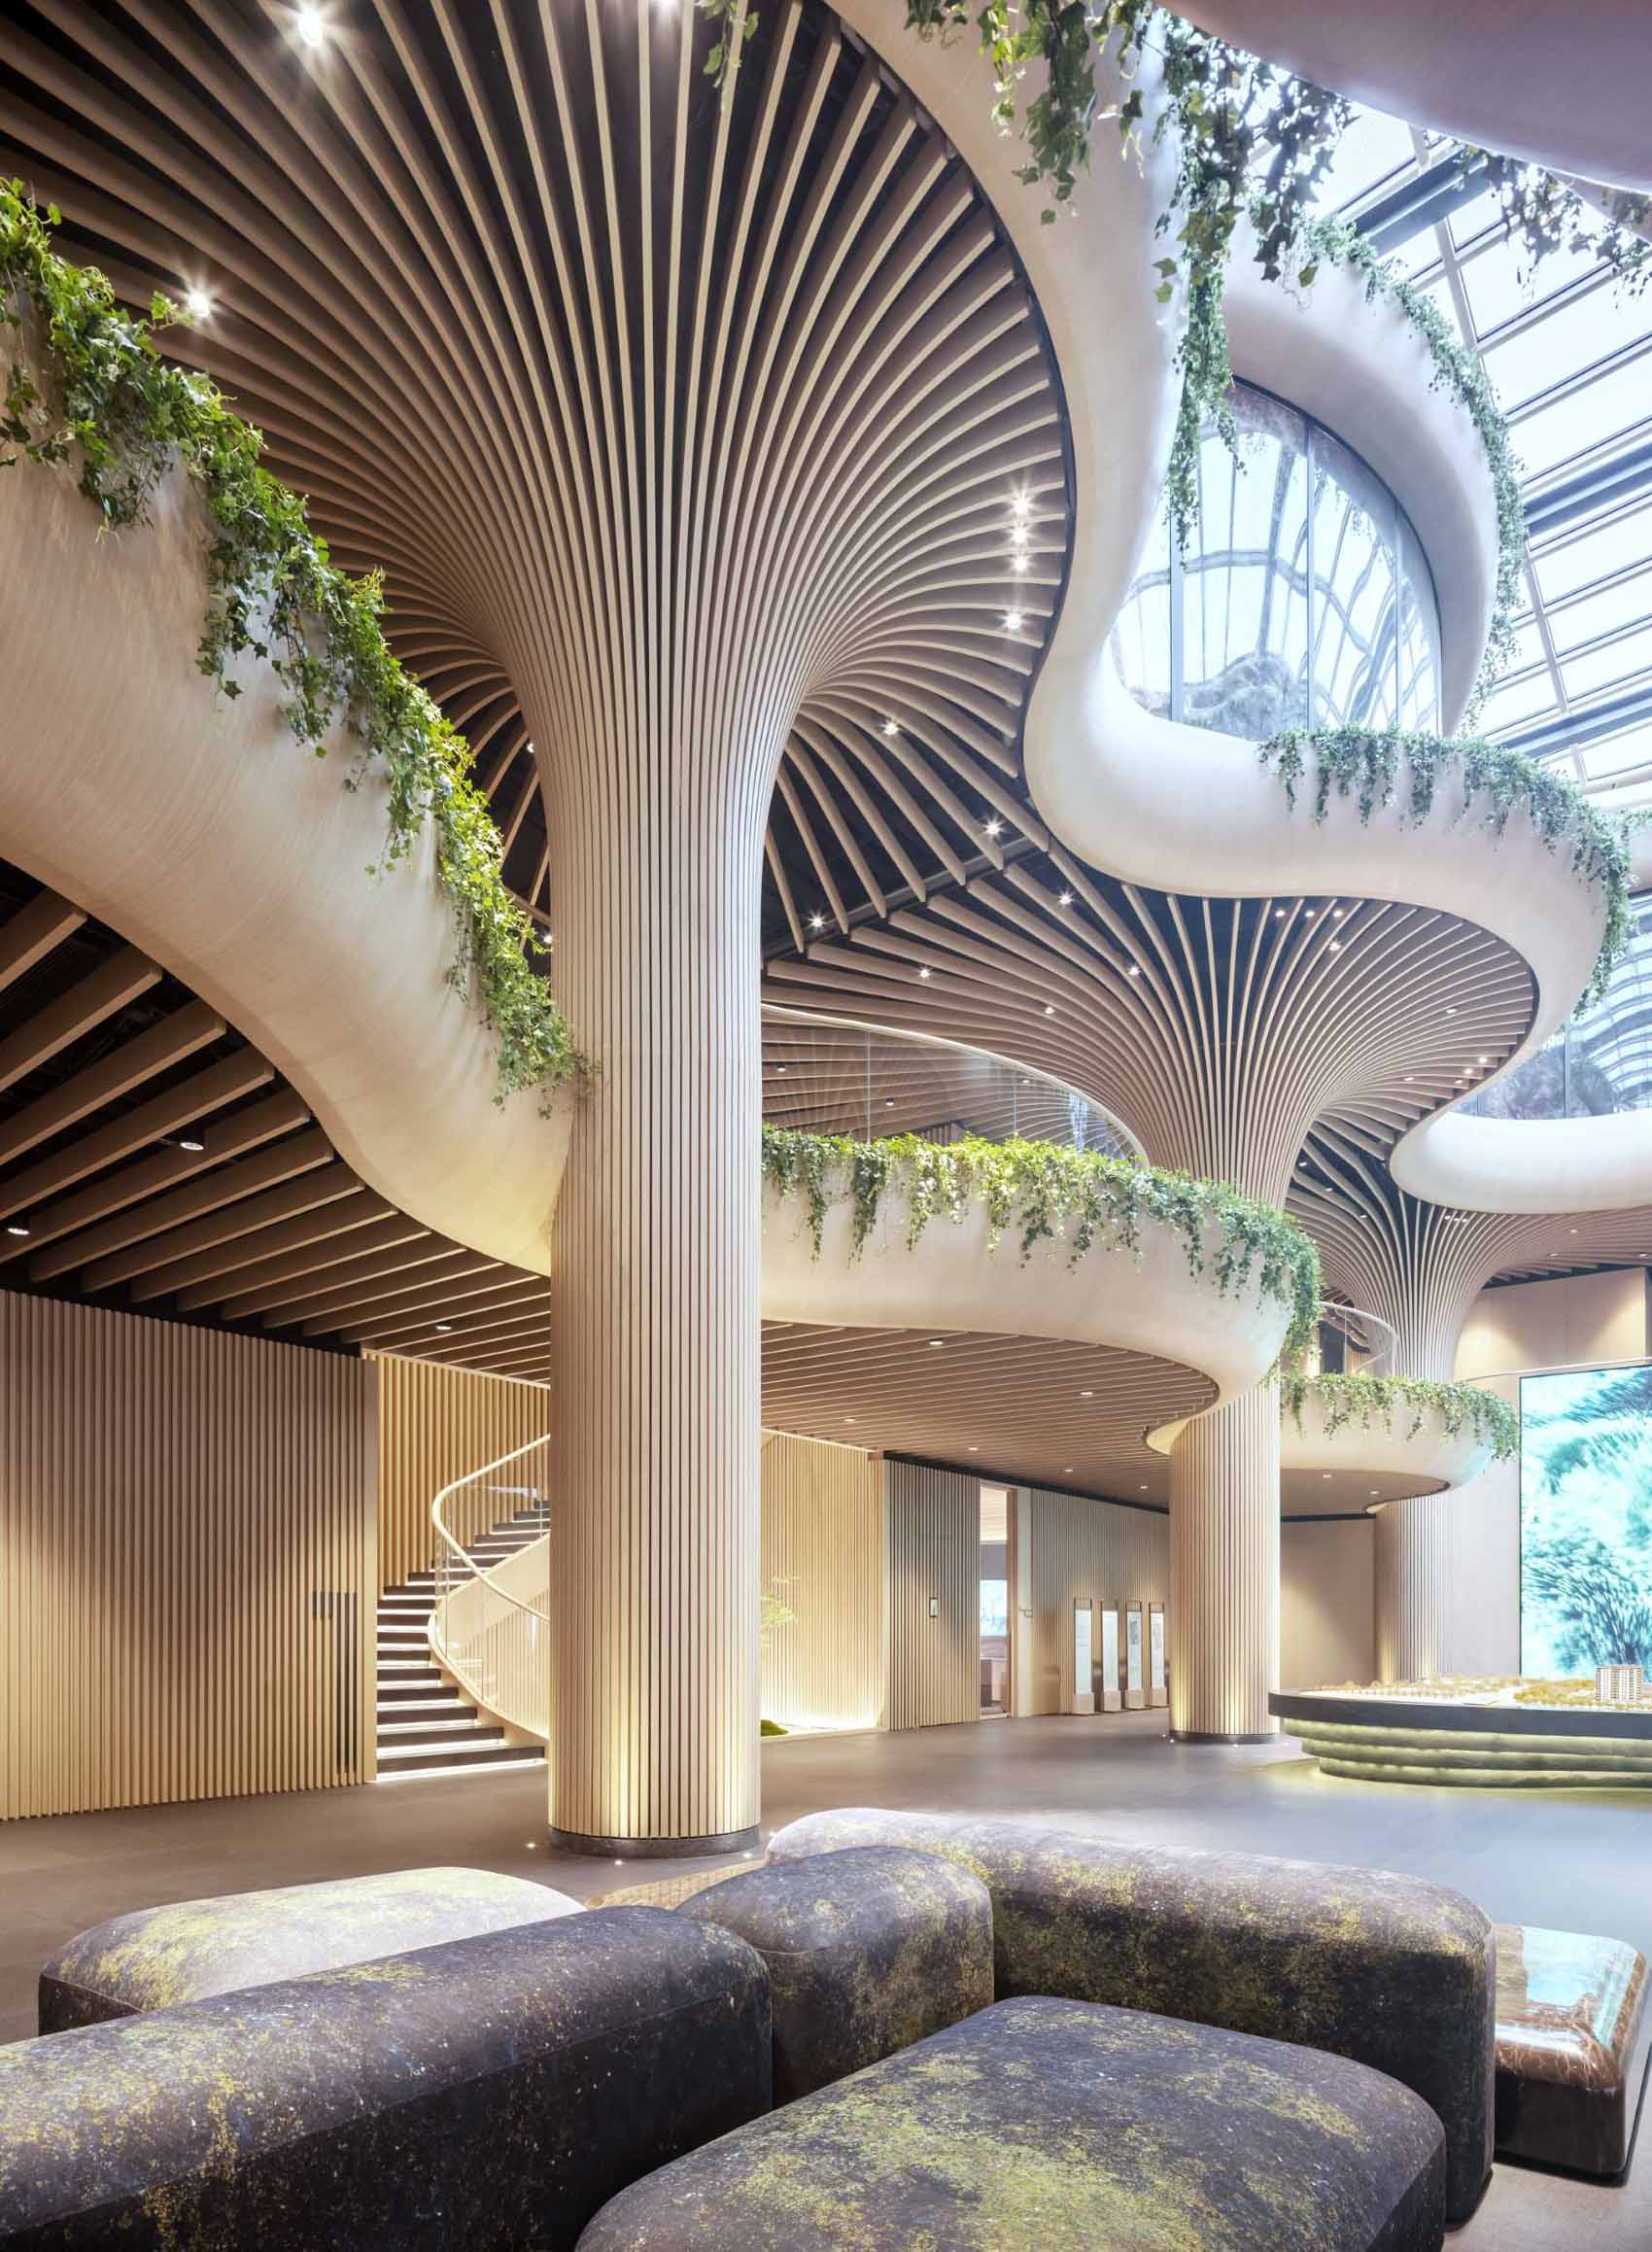 A modern building whose design has been inspired by trees.